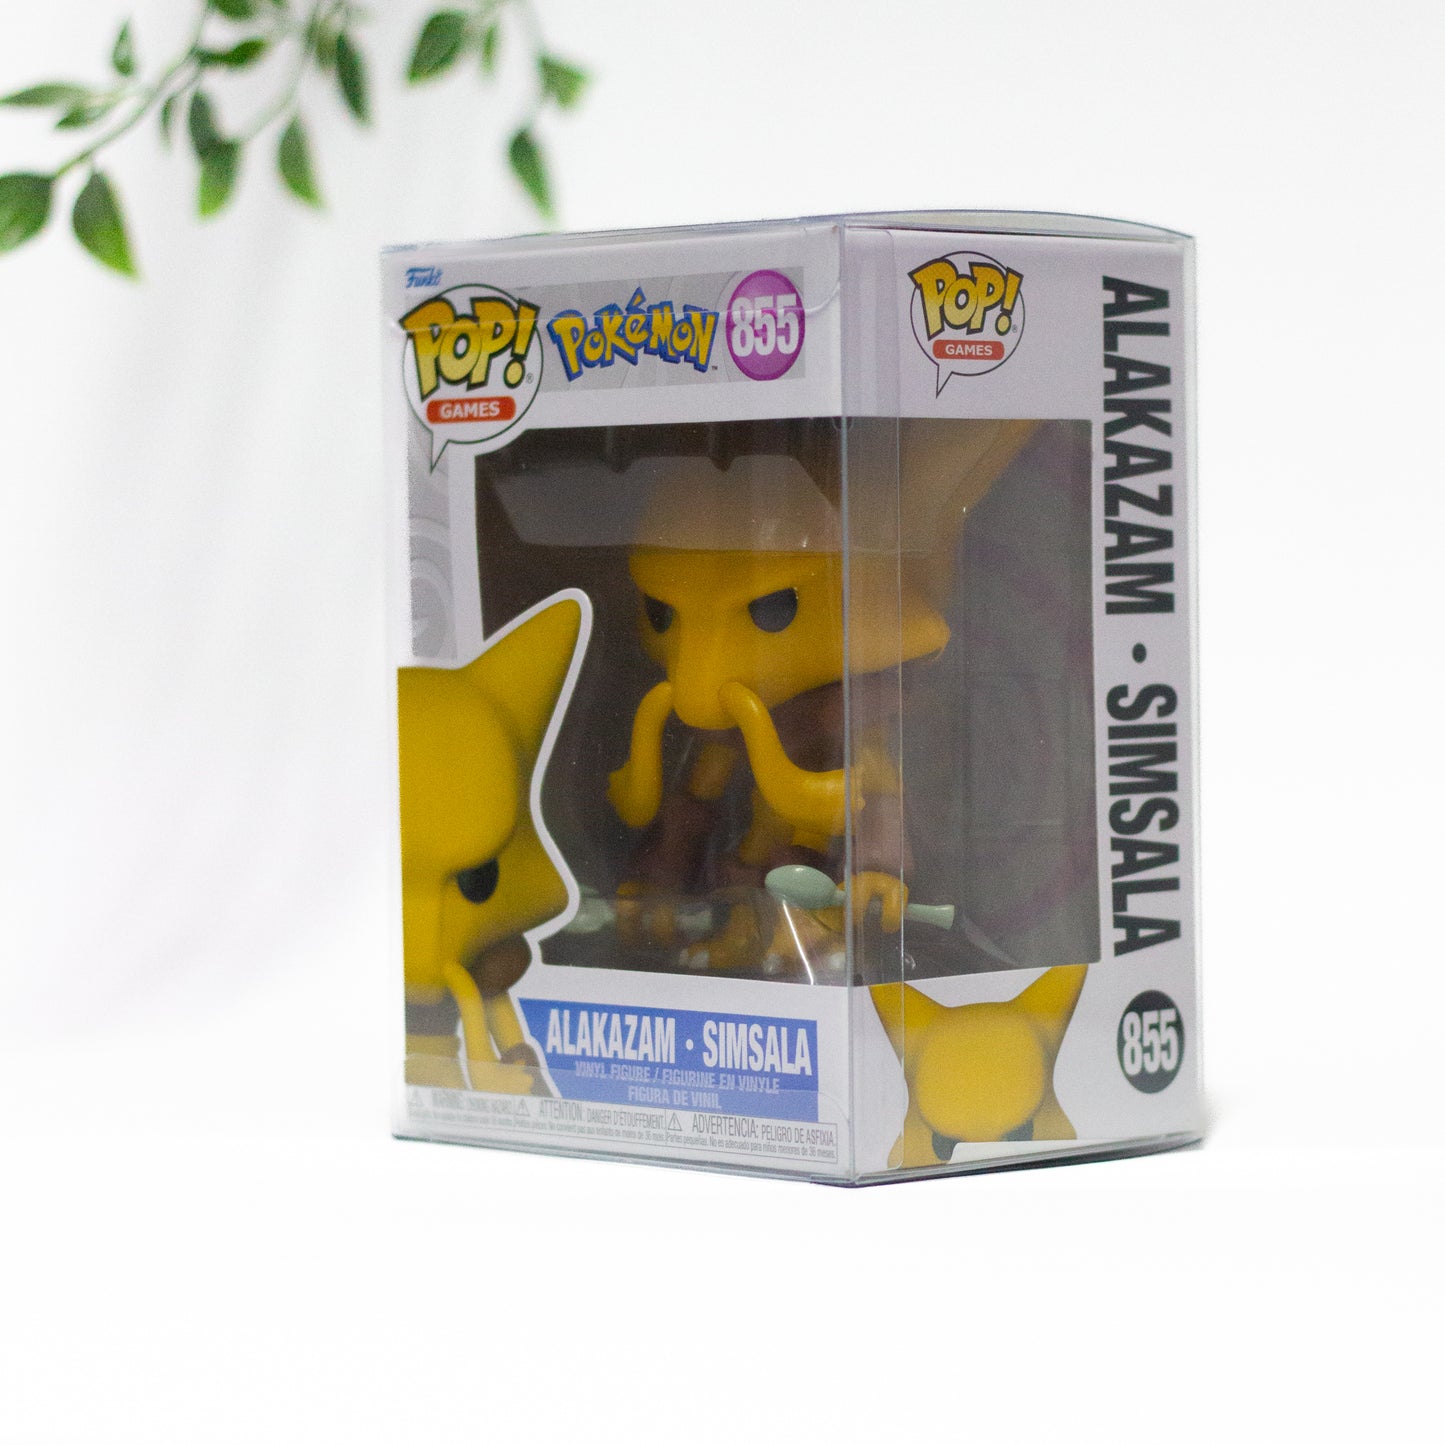 Funko Pop Protector ( 5-pack)